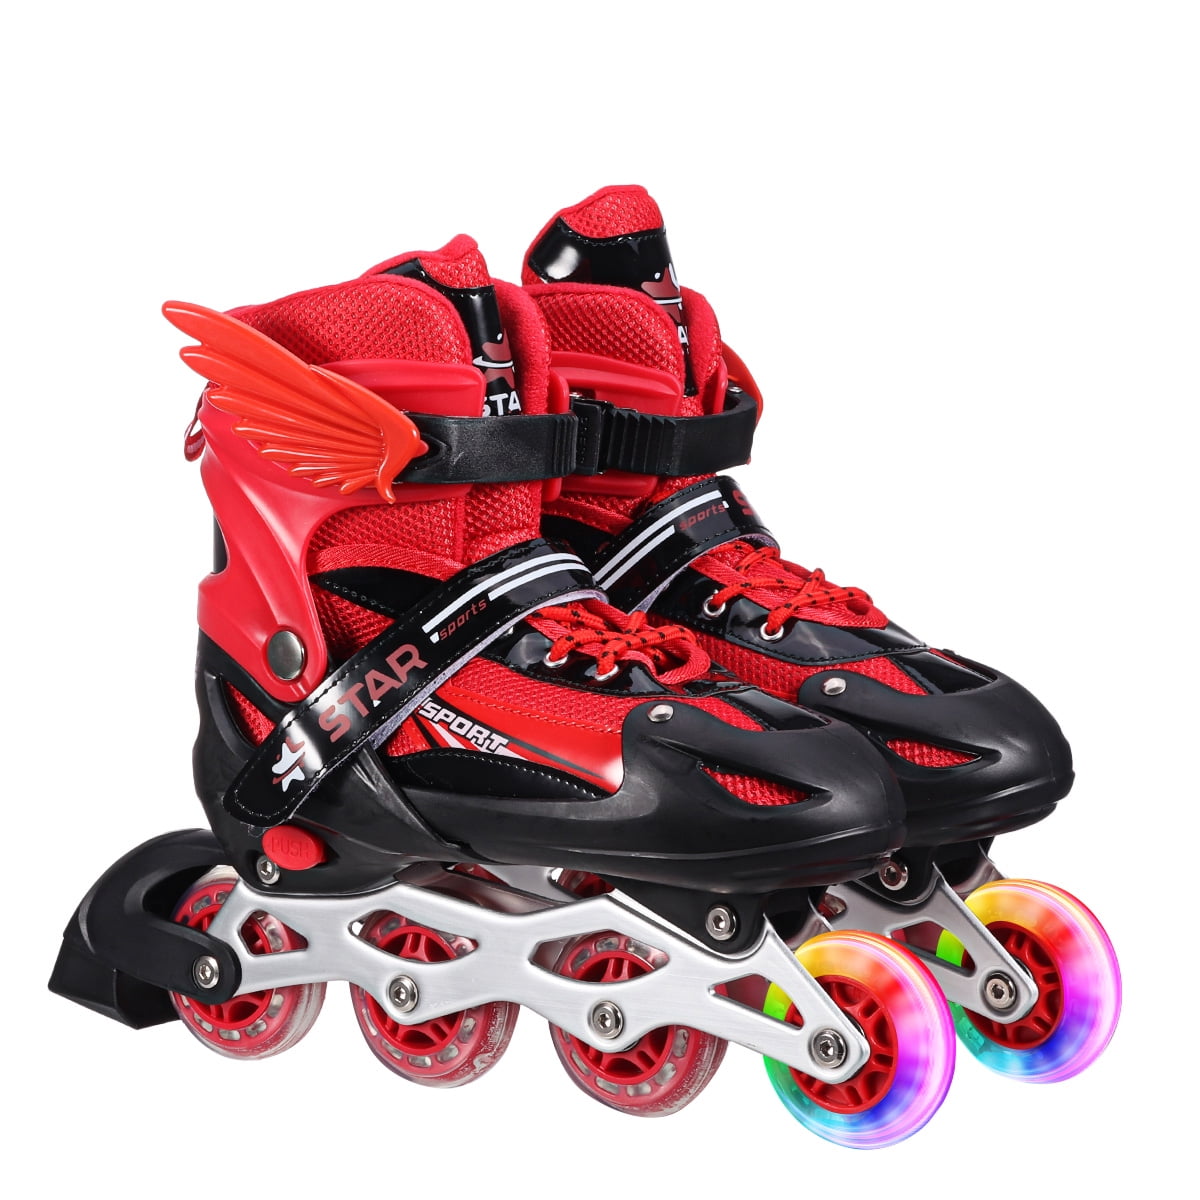 AUXSOUL Inline Skates Adjustable Illuminating Roller Skates Outdoor Indoor with Light Up Wheels for Kids Teenagers Adult Girls Boys and Beginners